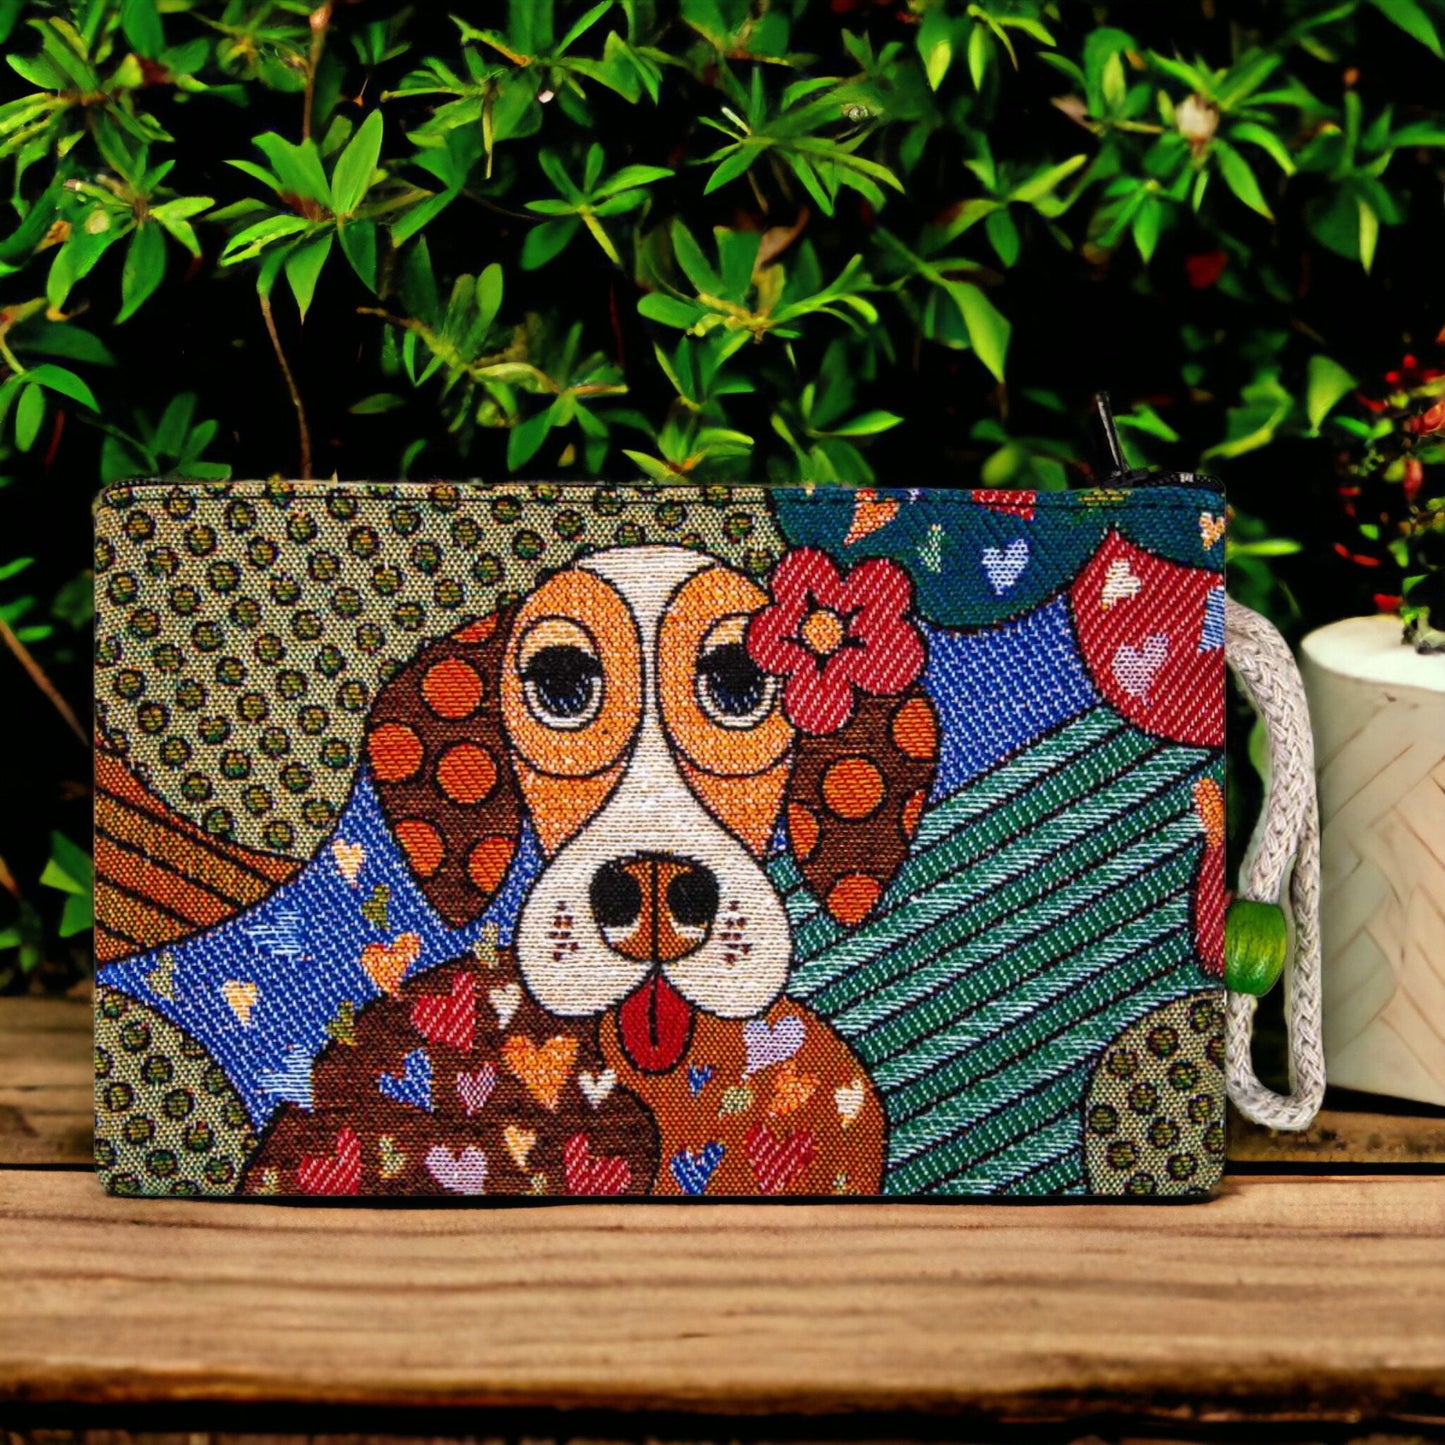 Authentic Kilim Fabric Colorful Modern Dog Art Zipper Clutch Purse, Turkish Carpet, Pouch, Coin Purse, Wallet, Small Storage Puppy Mom